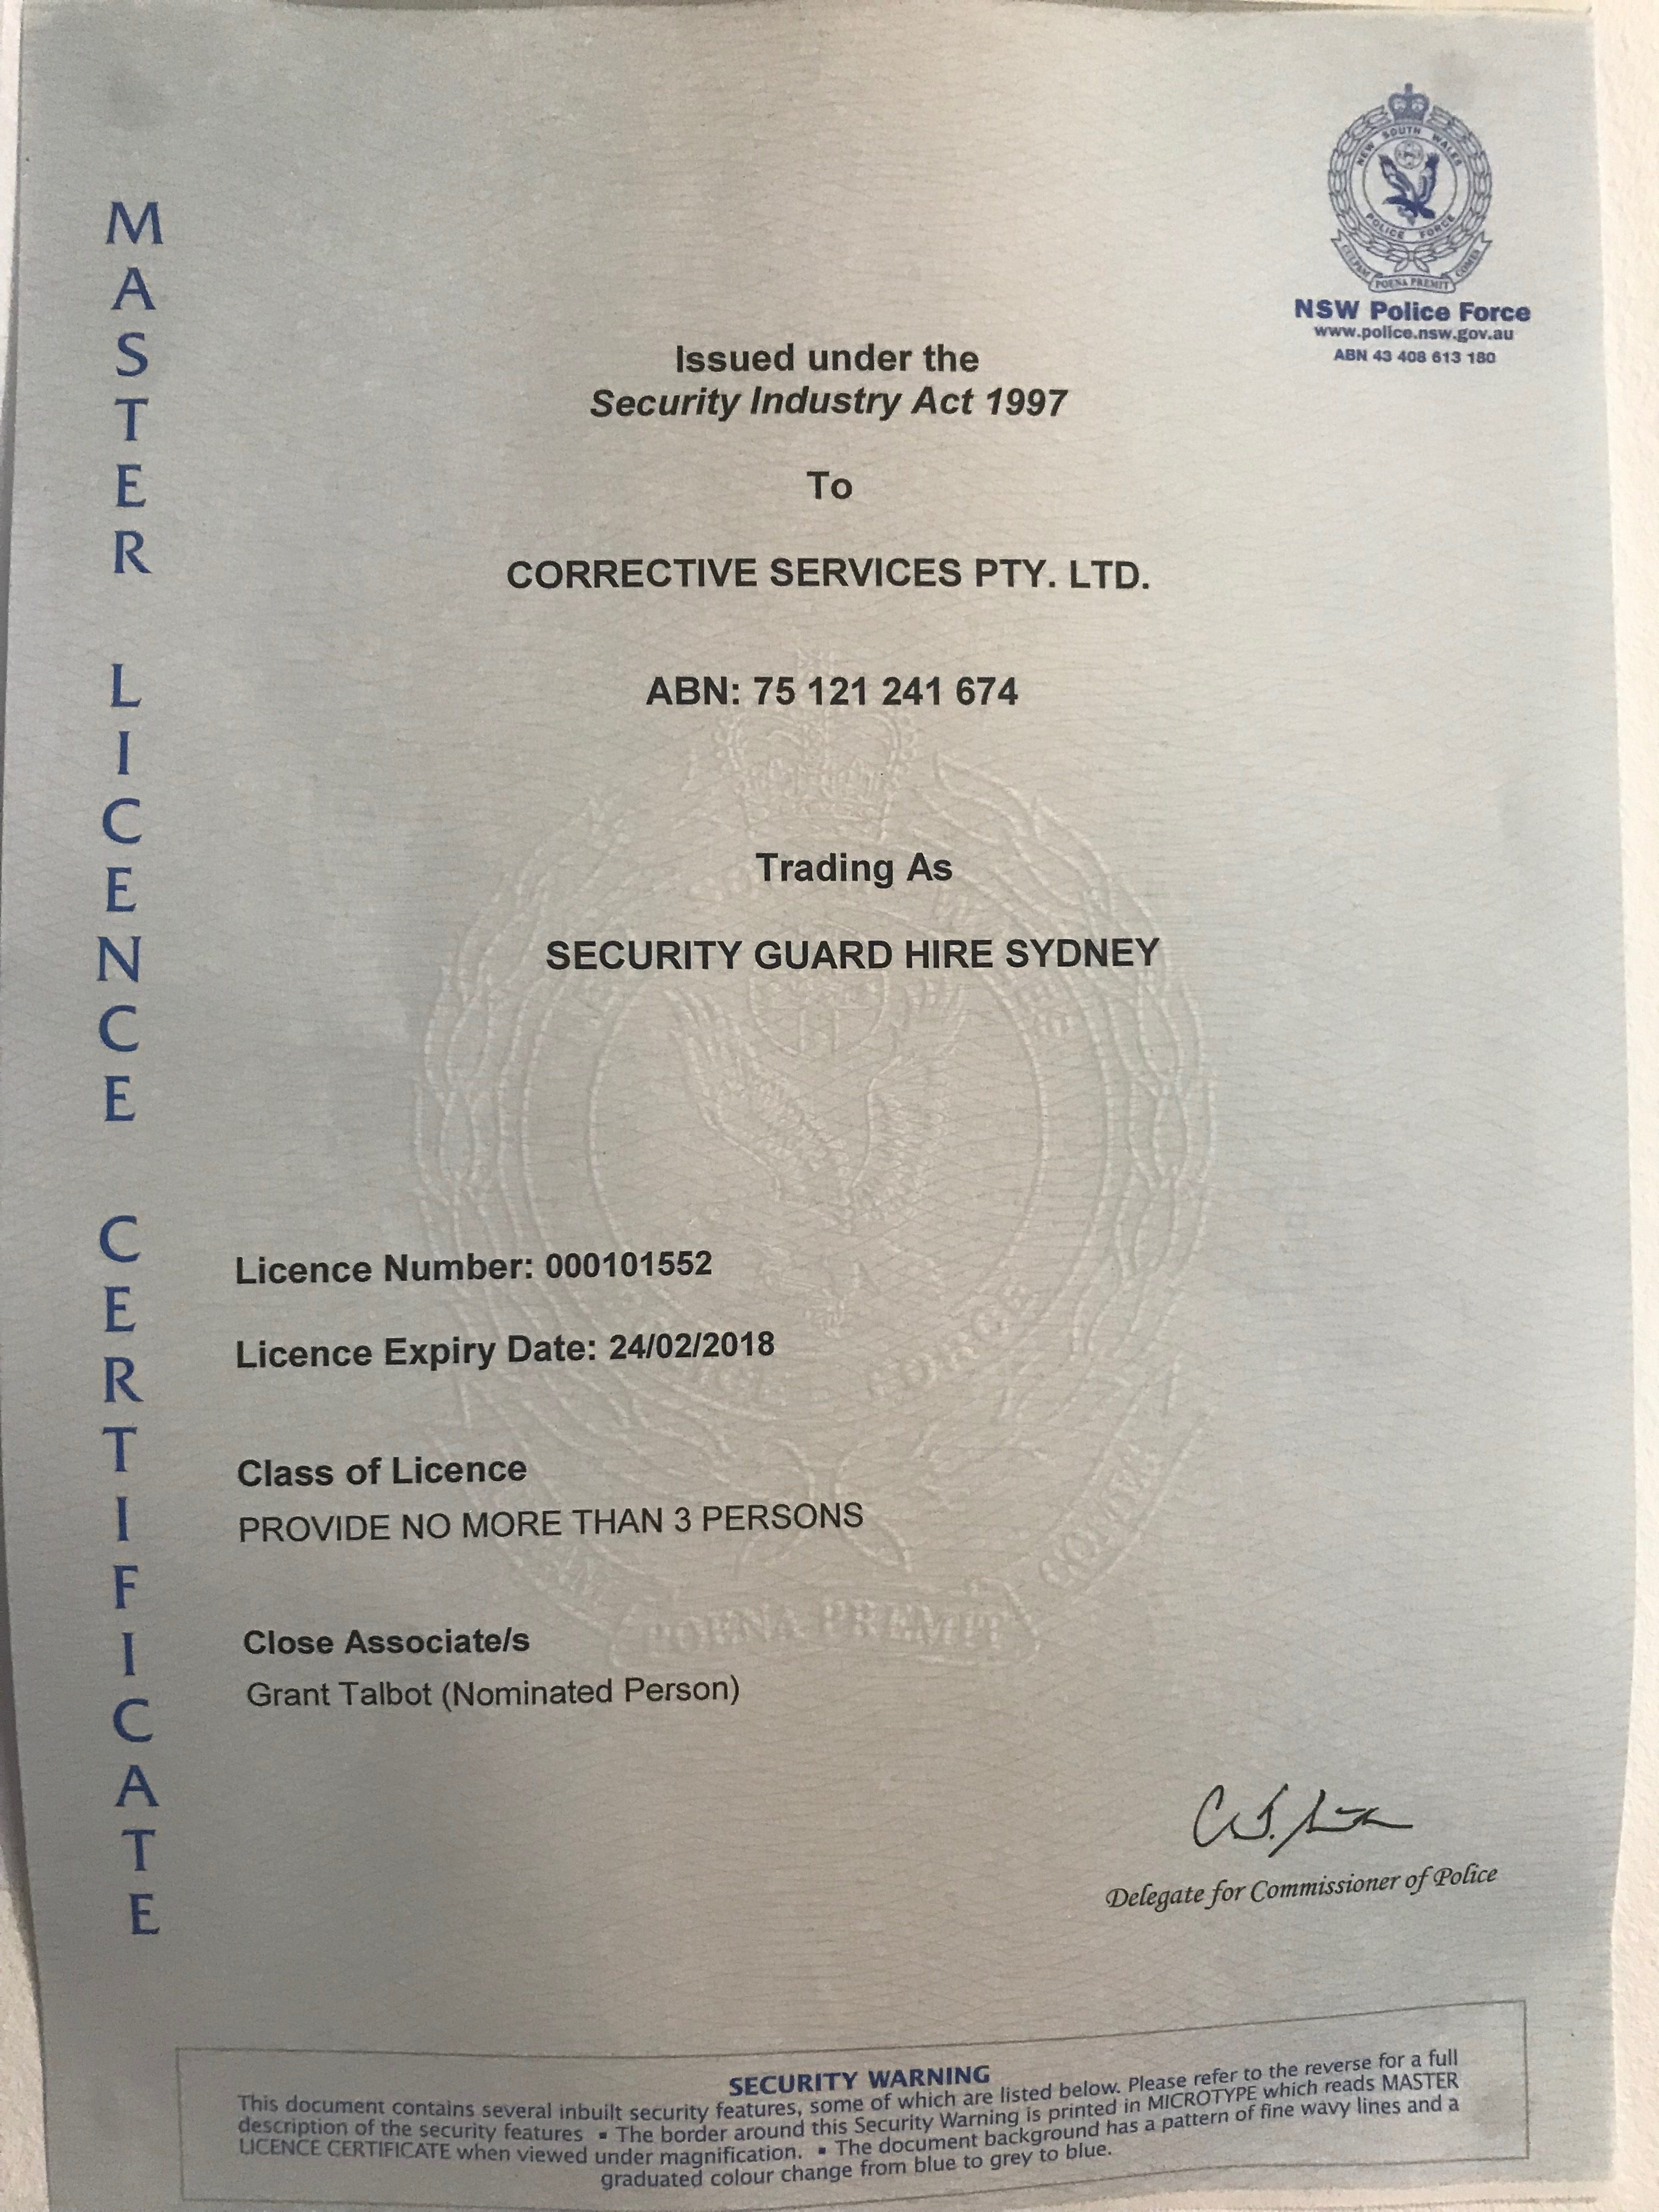 NSW Master Licence: 000101552